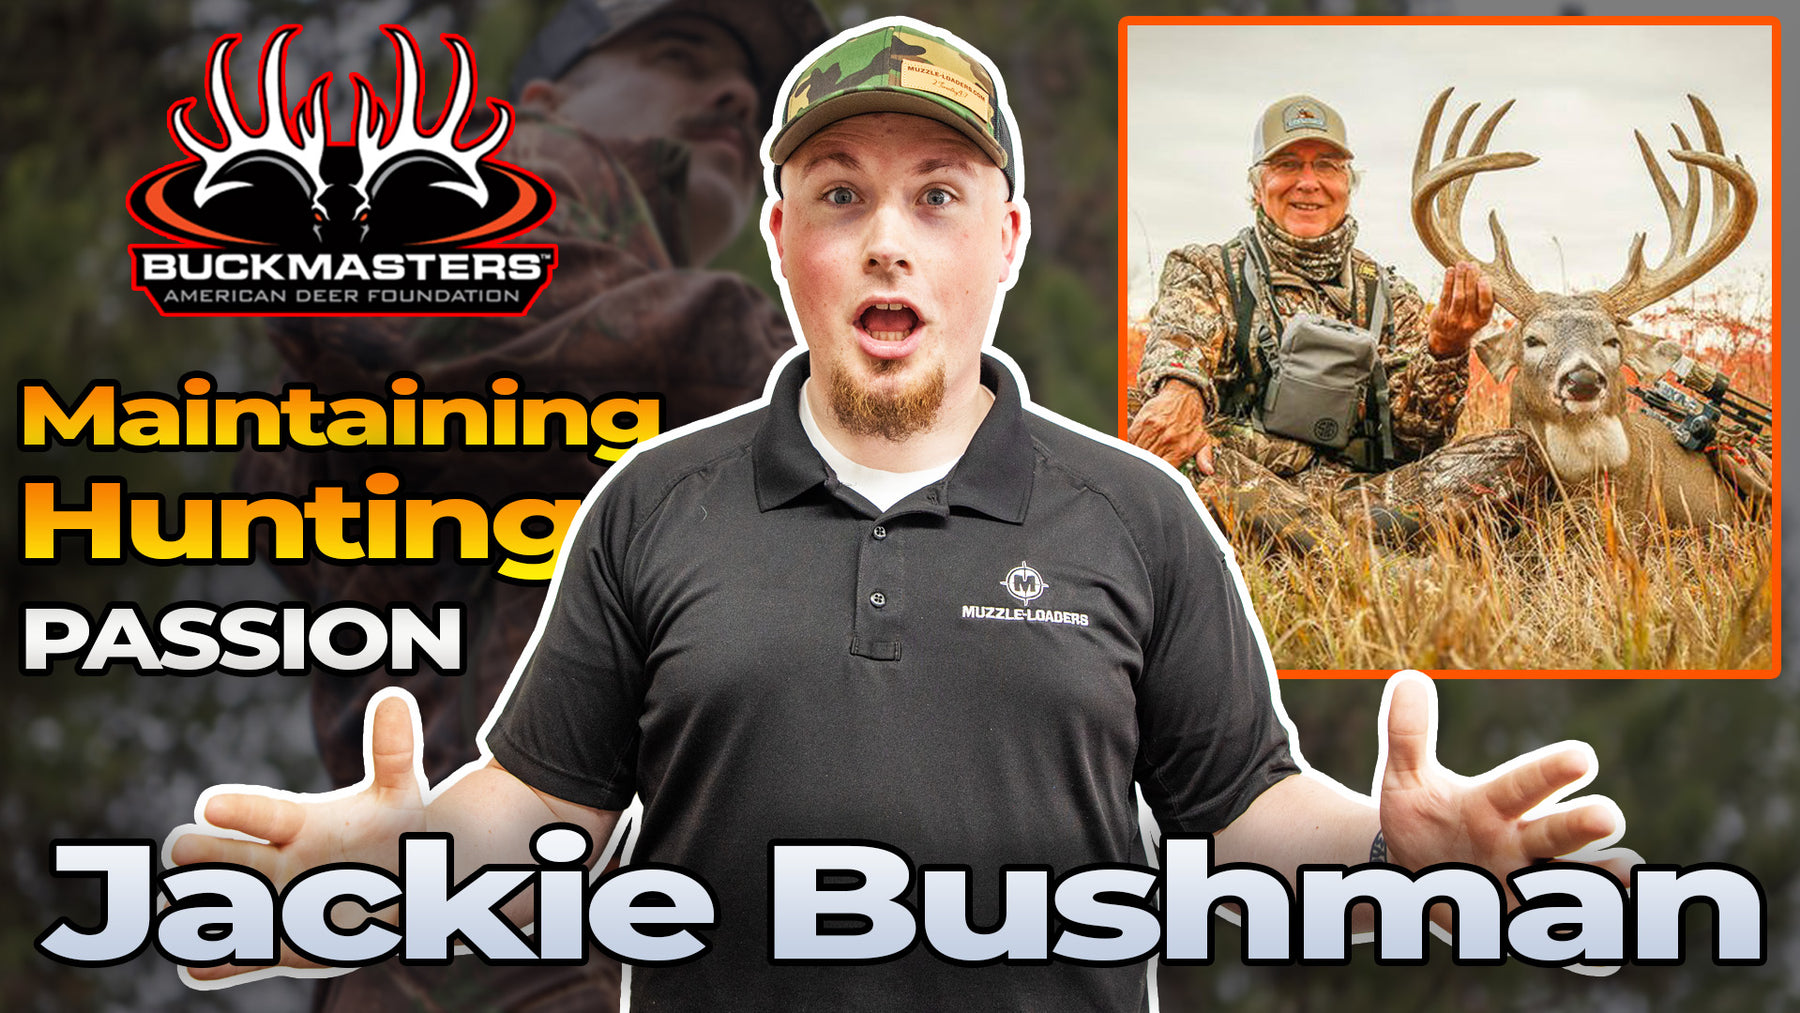 Jackie Bushman on Maintaining a Passion for Hunting